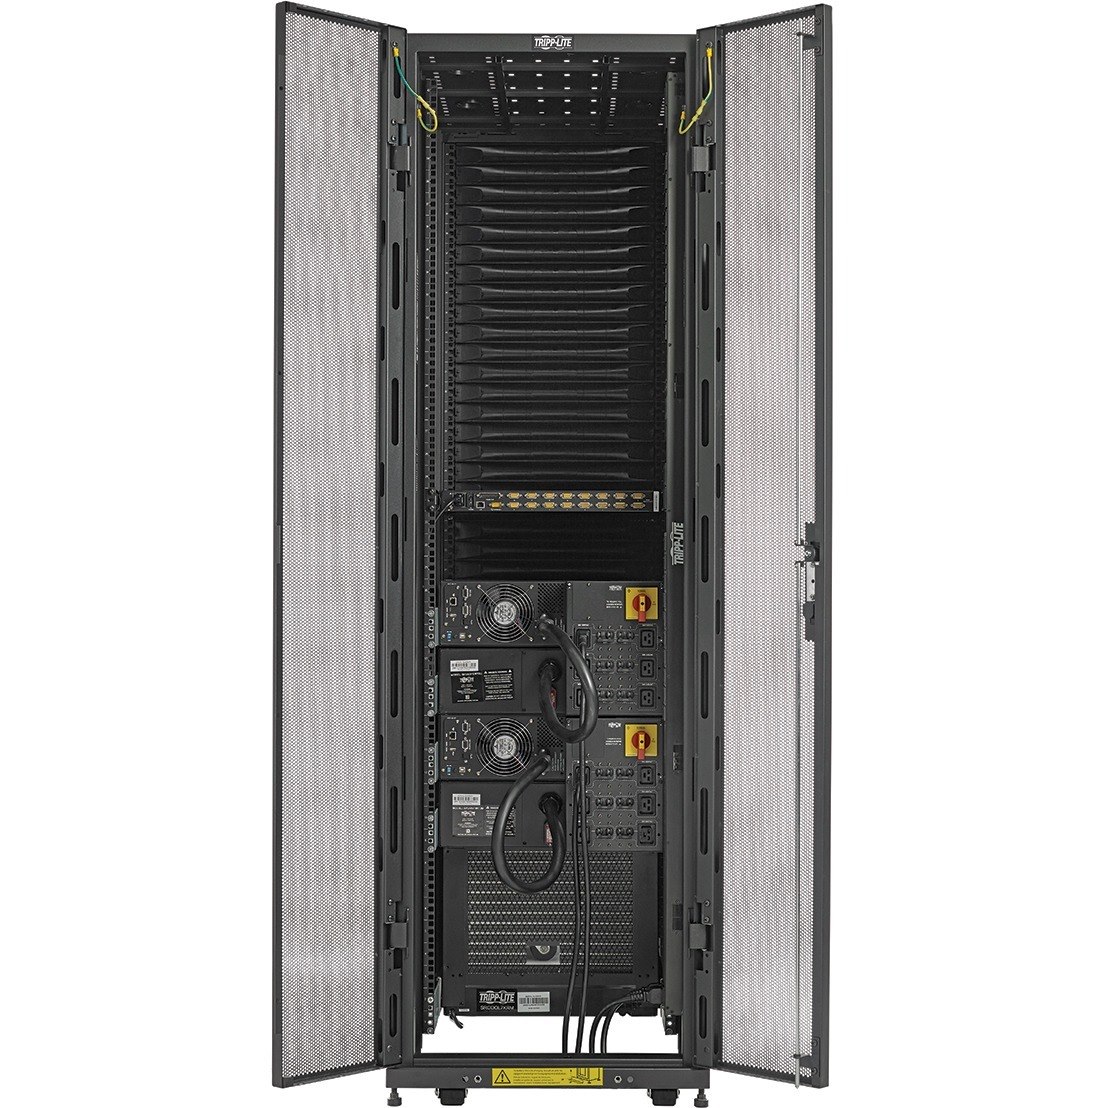 Tripp Lite by Eaton EdgeReady&trade; Micro Data Center - 38U, (2) 3 kVA UPS Systems (N+N), Network Management and Dual PDUs, 230V Kit